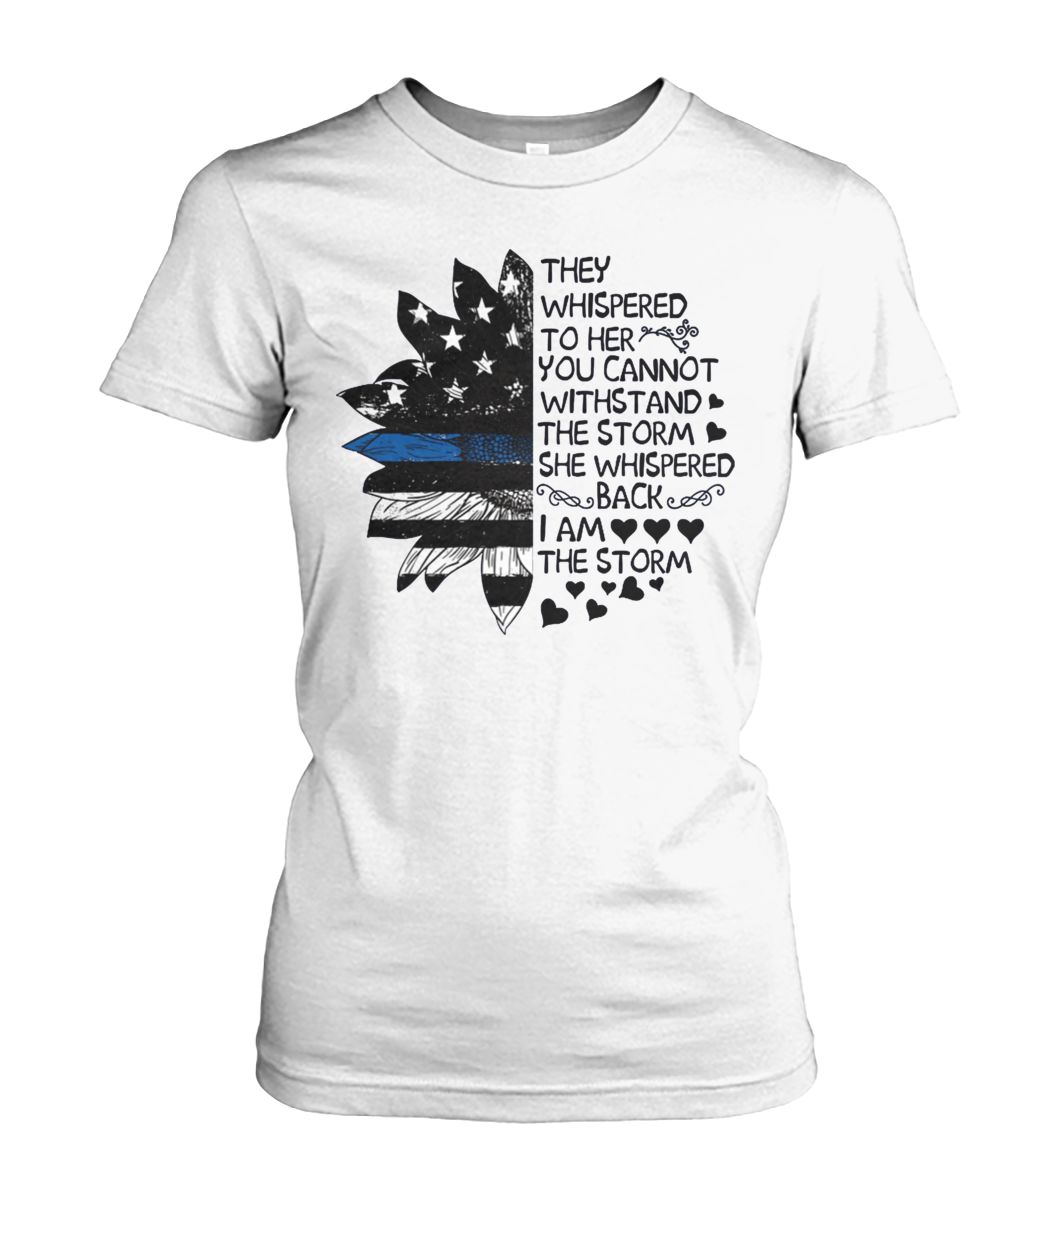 They whispered to her you cannot withstand the storm she whispered back sunflower women's crew tee